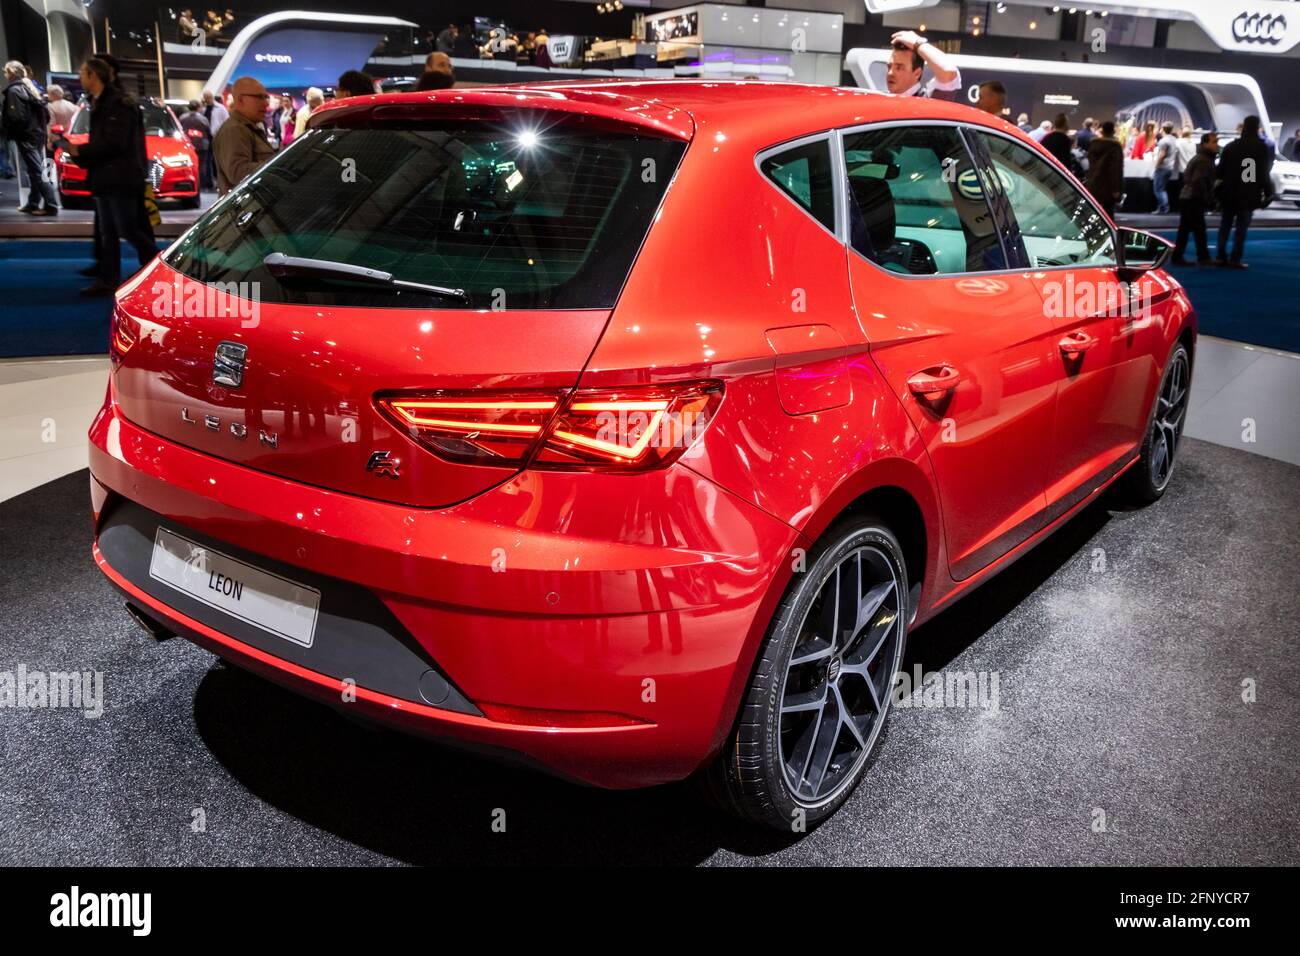 Seat Leon car showcased at the Brussels Expo Autosalon motor show. Belgium - January 19, 2017 Stock Photo